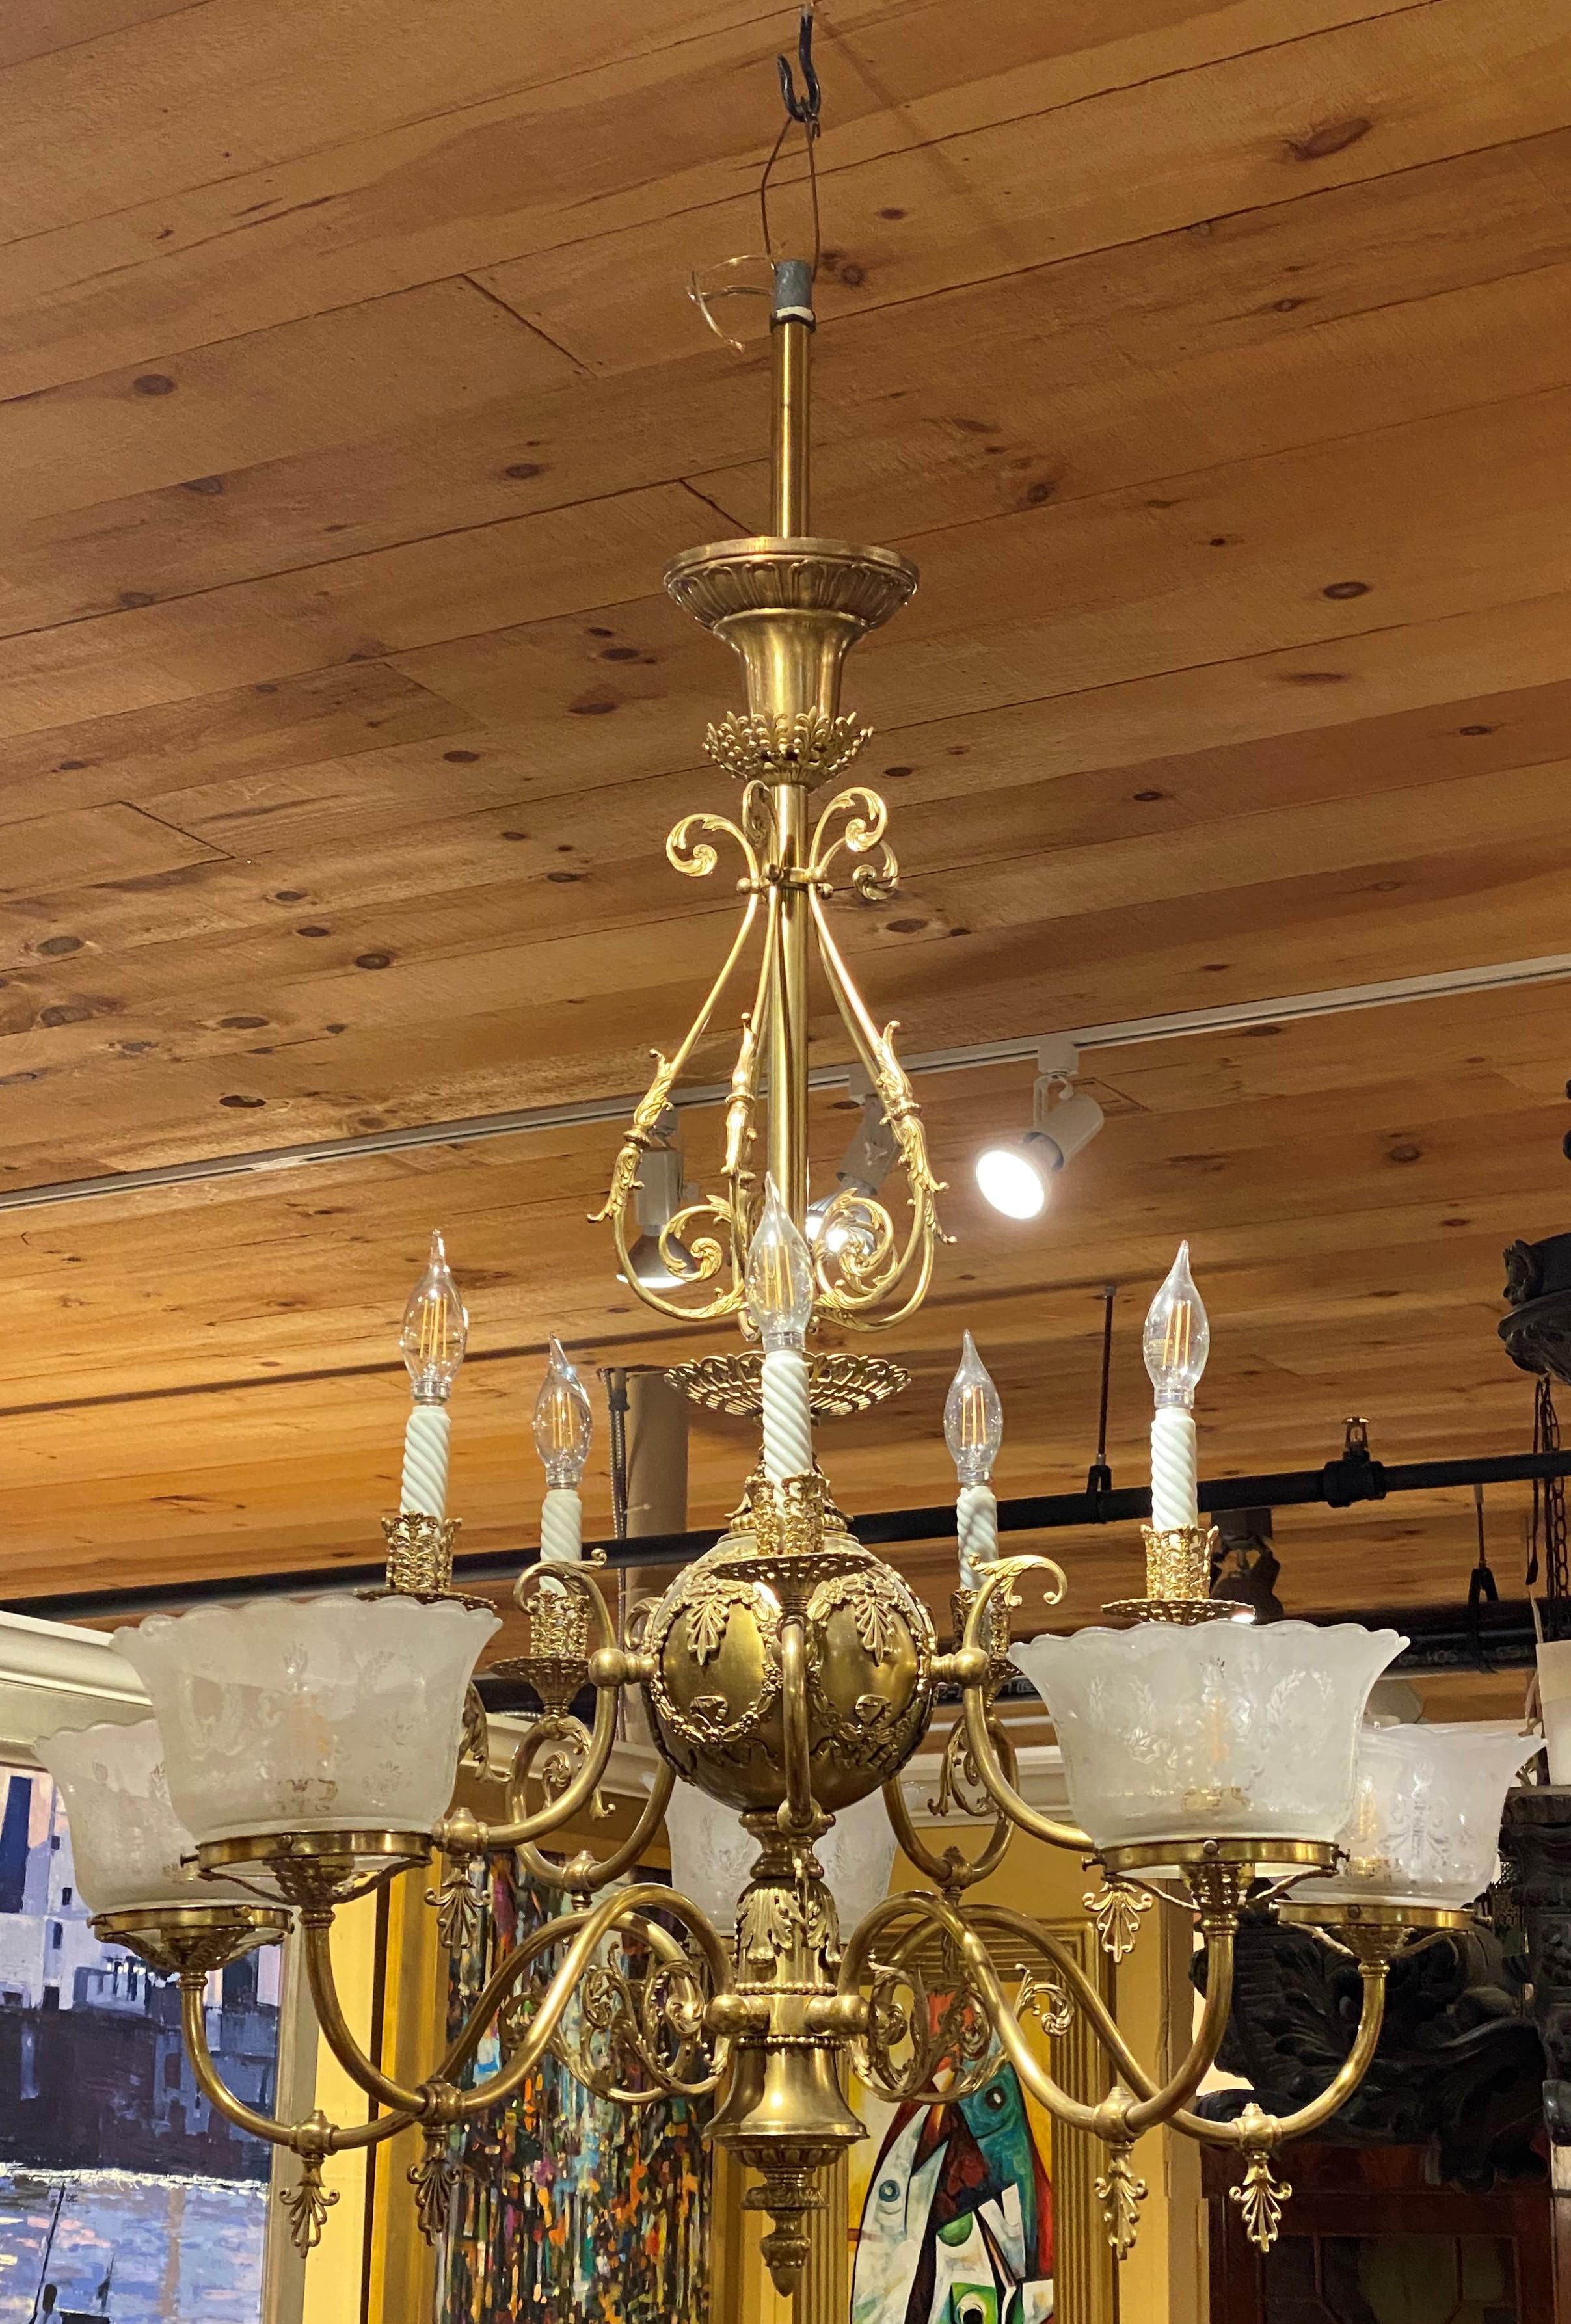 A fine 10-light two tier brass gasolier / chandelier that has been recently electrified with 5 upper candle lights and 5 lower lights extended on scrolled arms, with ruffled edge etched shades, around a decorated center ball with single drop or